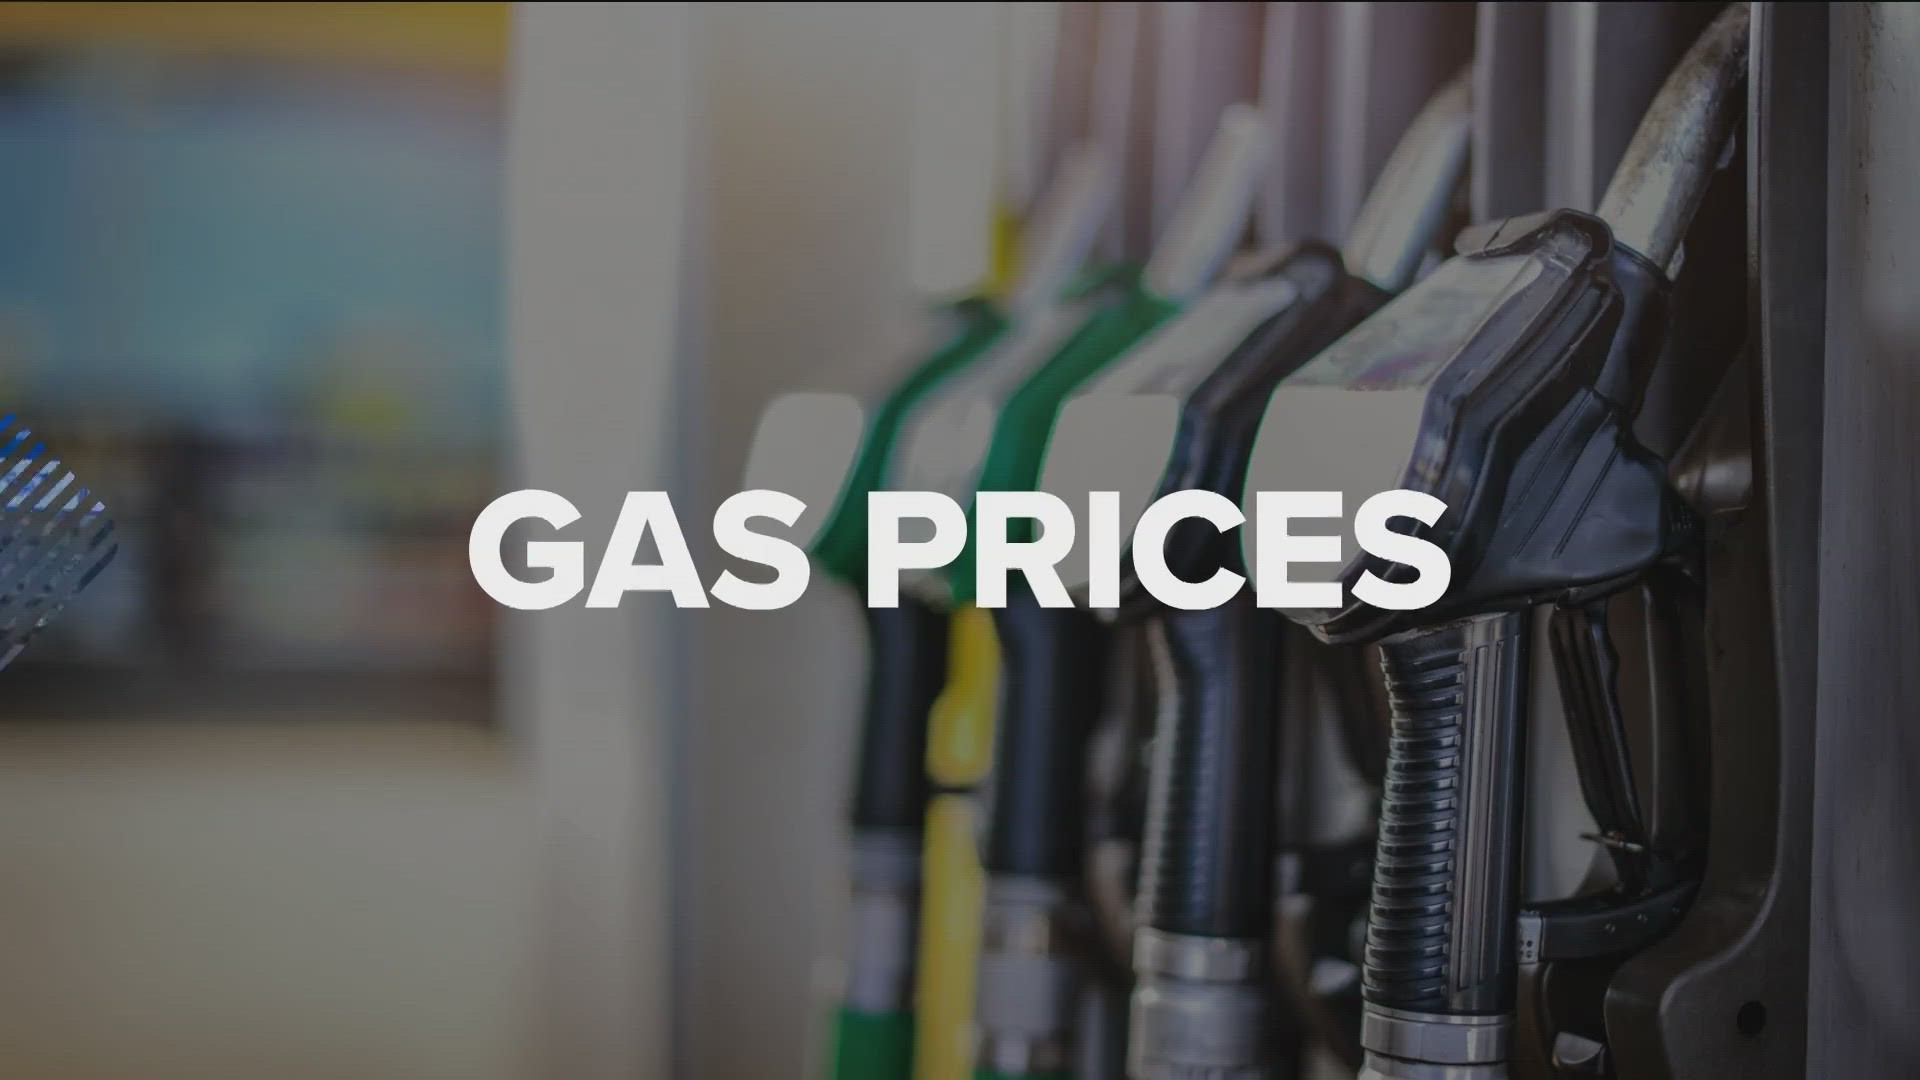 "We've seen gasoline prices move higher in some states, while others have continued to decline. The national average has seen little change as a result."